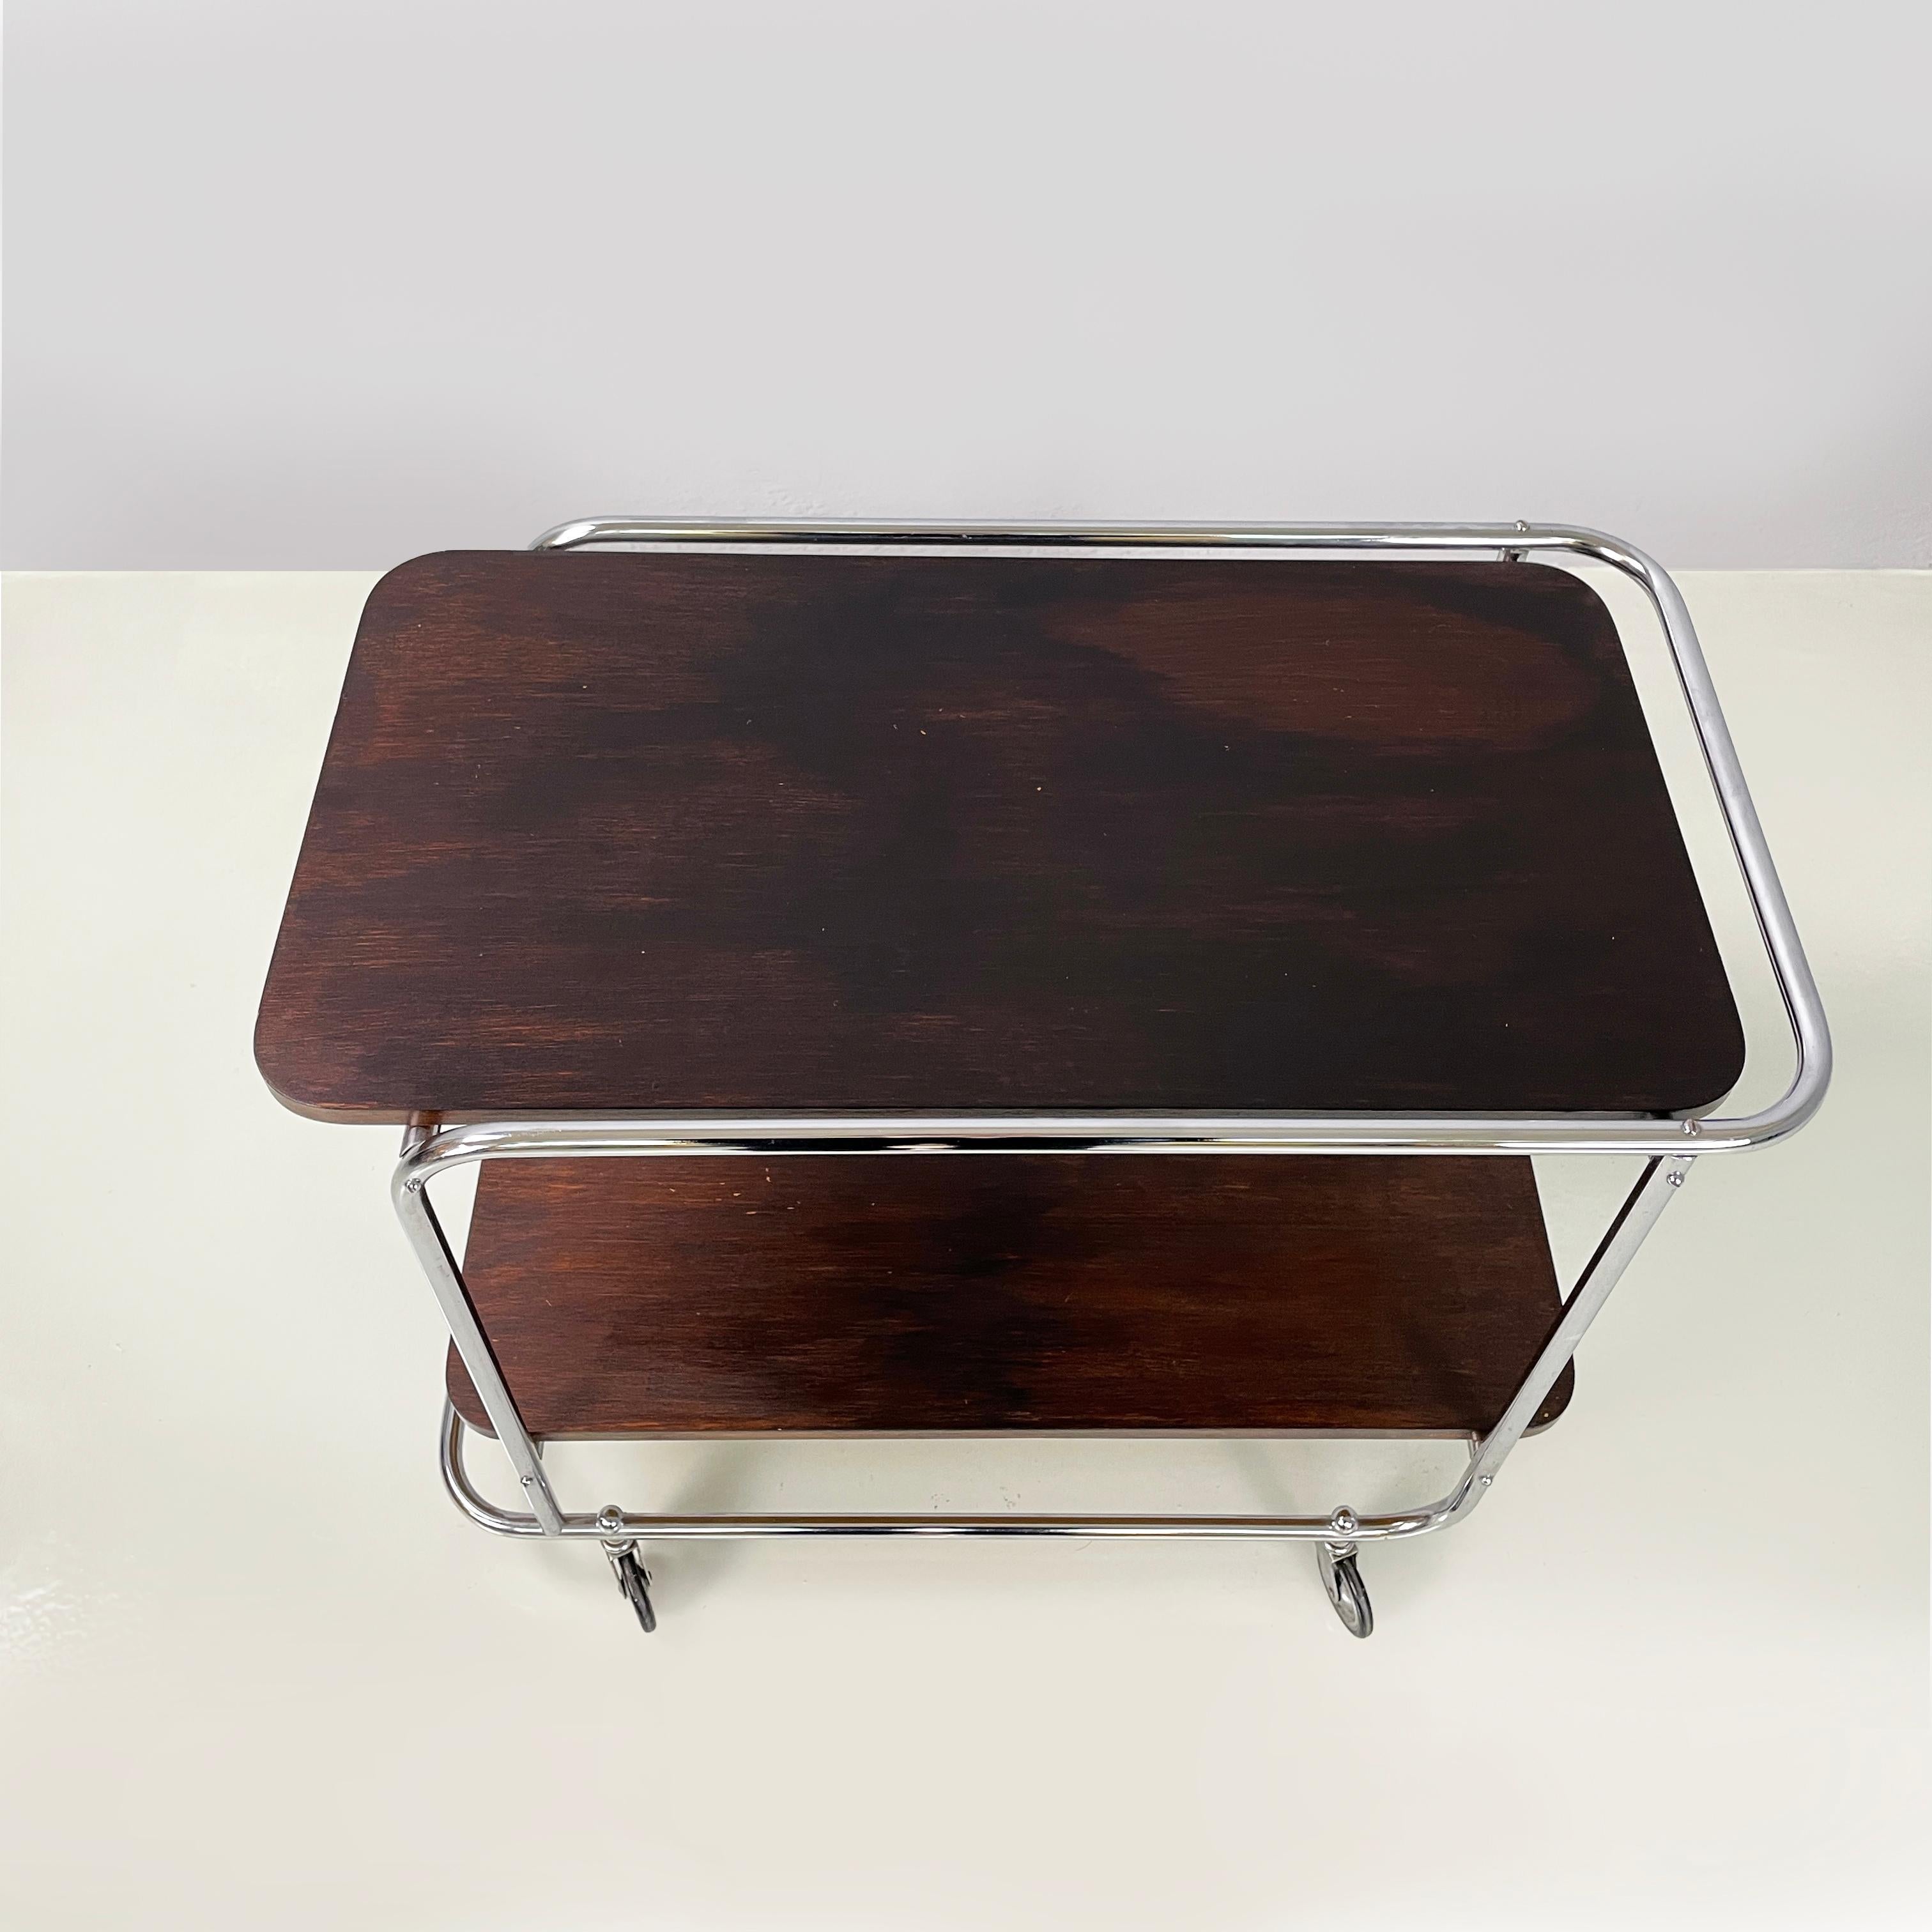 Mid-20th Century Italian mid-century modern Wood and metal cart with double shelf, 1940s For Sale